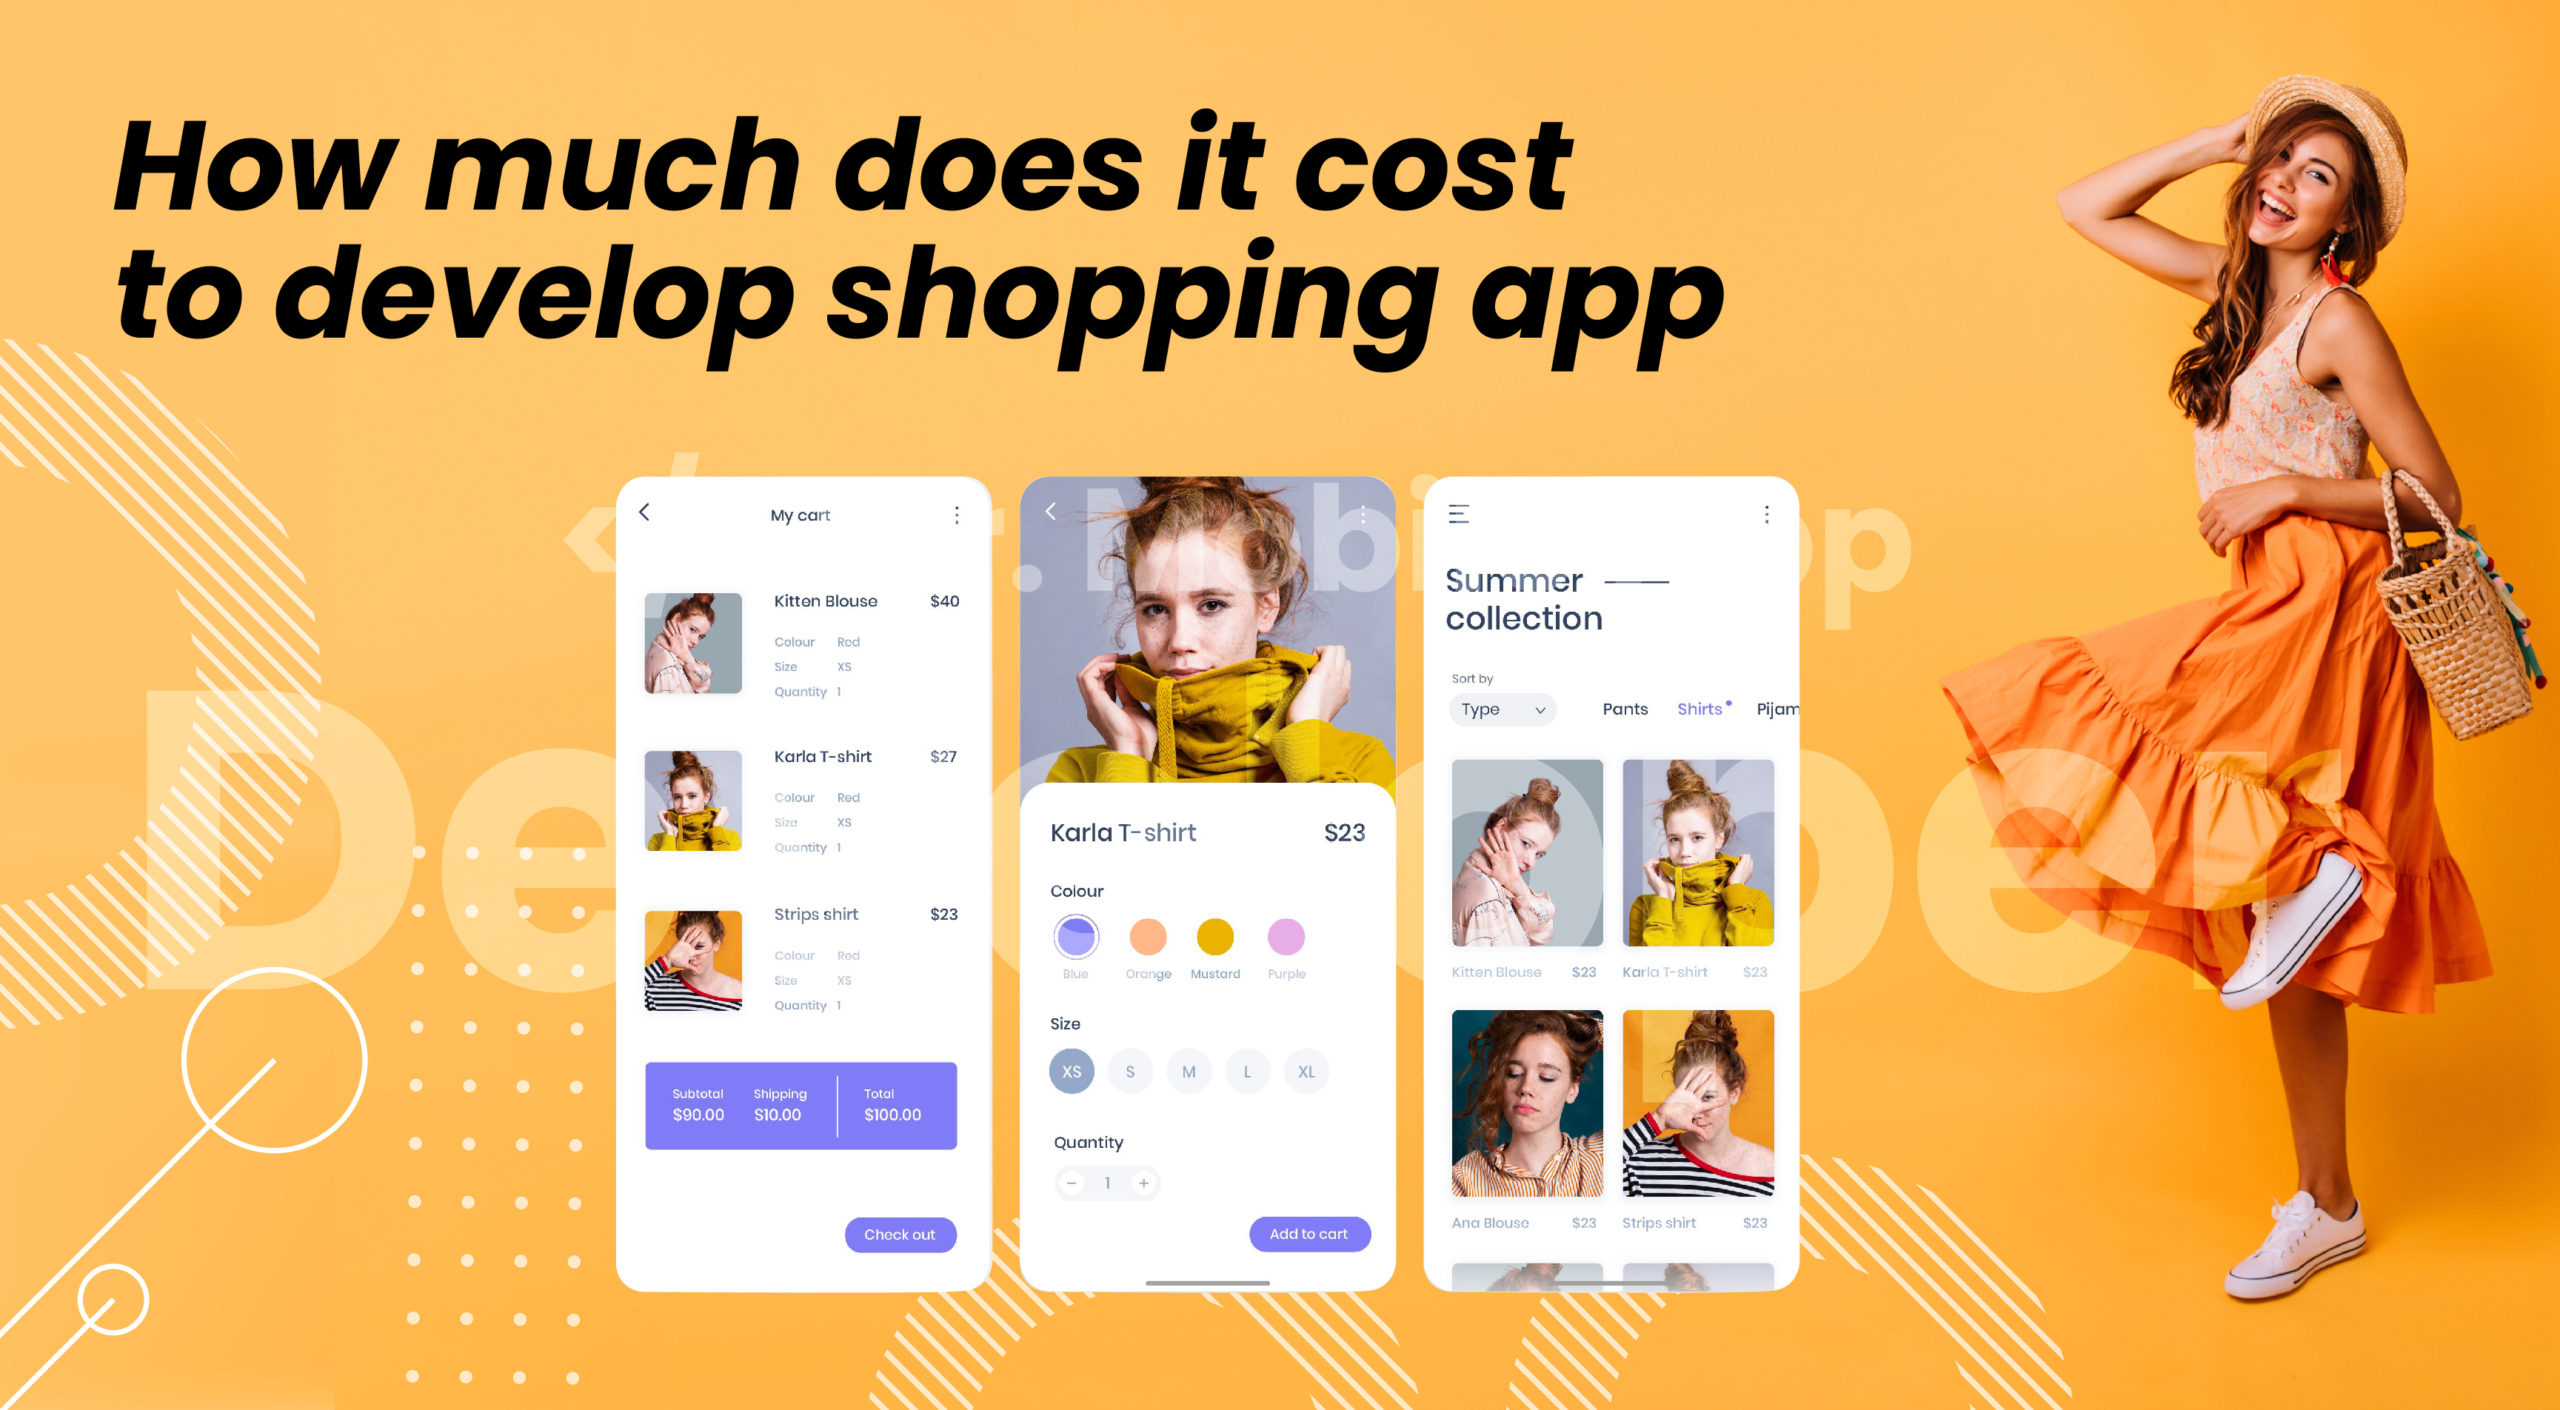 How much does it cost to develop shopping app